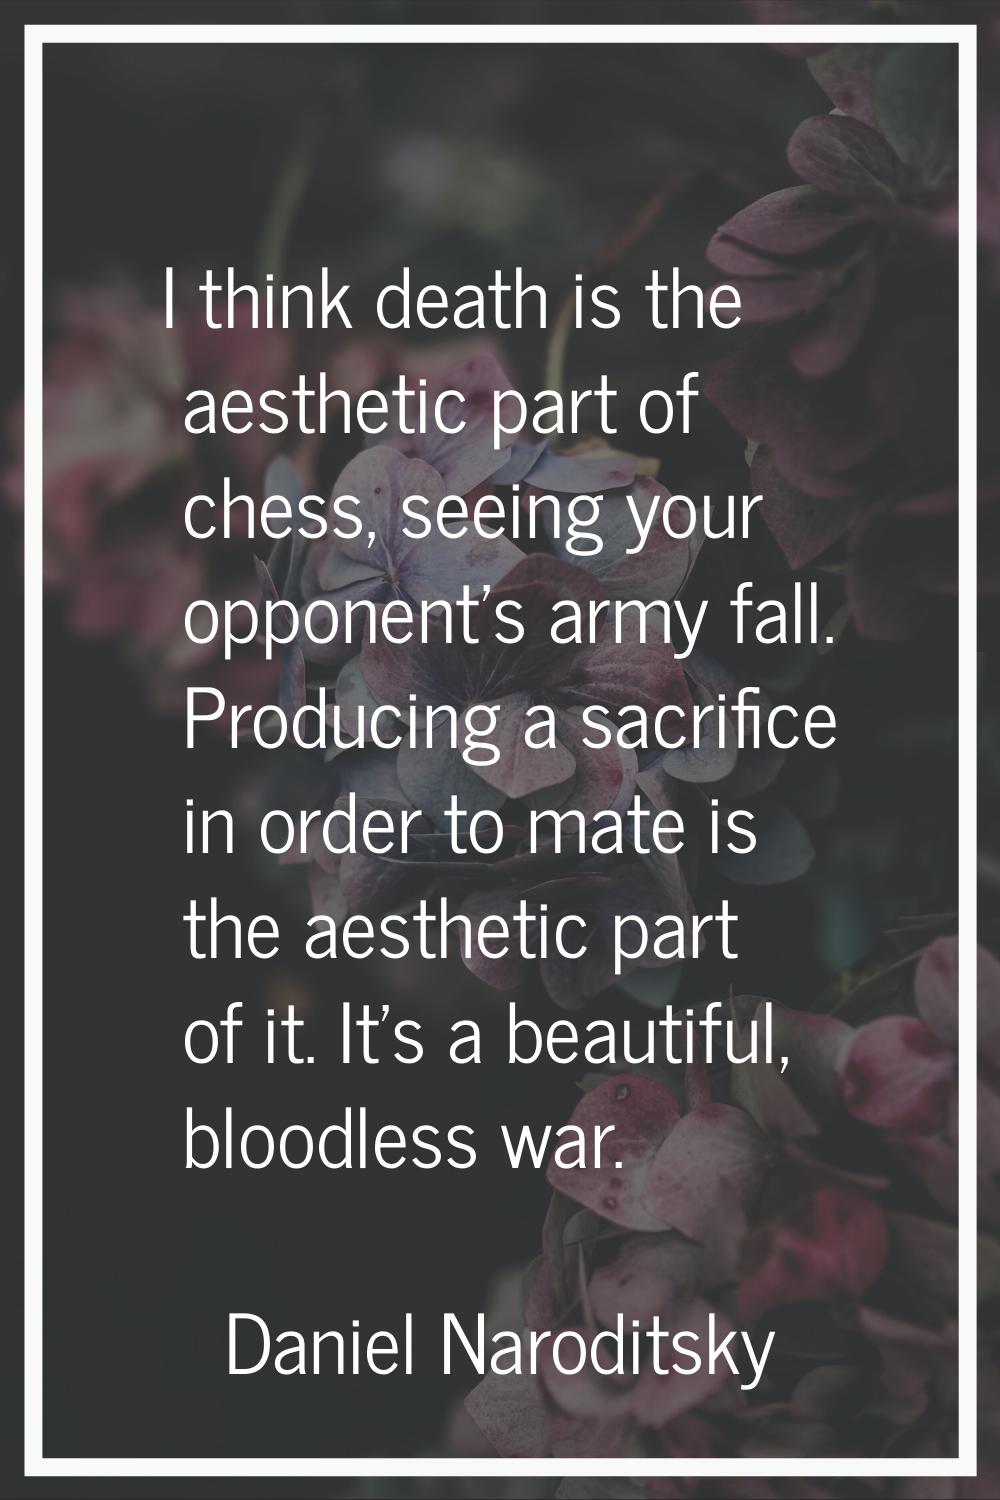 I think death is the aesthetic part of chess, seeing your opponent's army fall. Producing a sacrifi